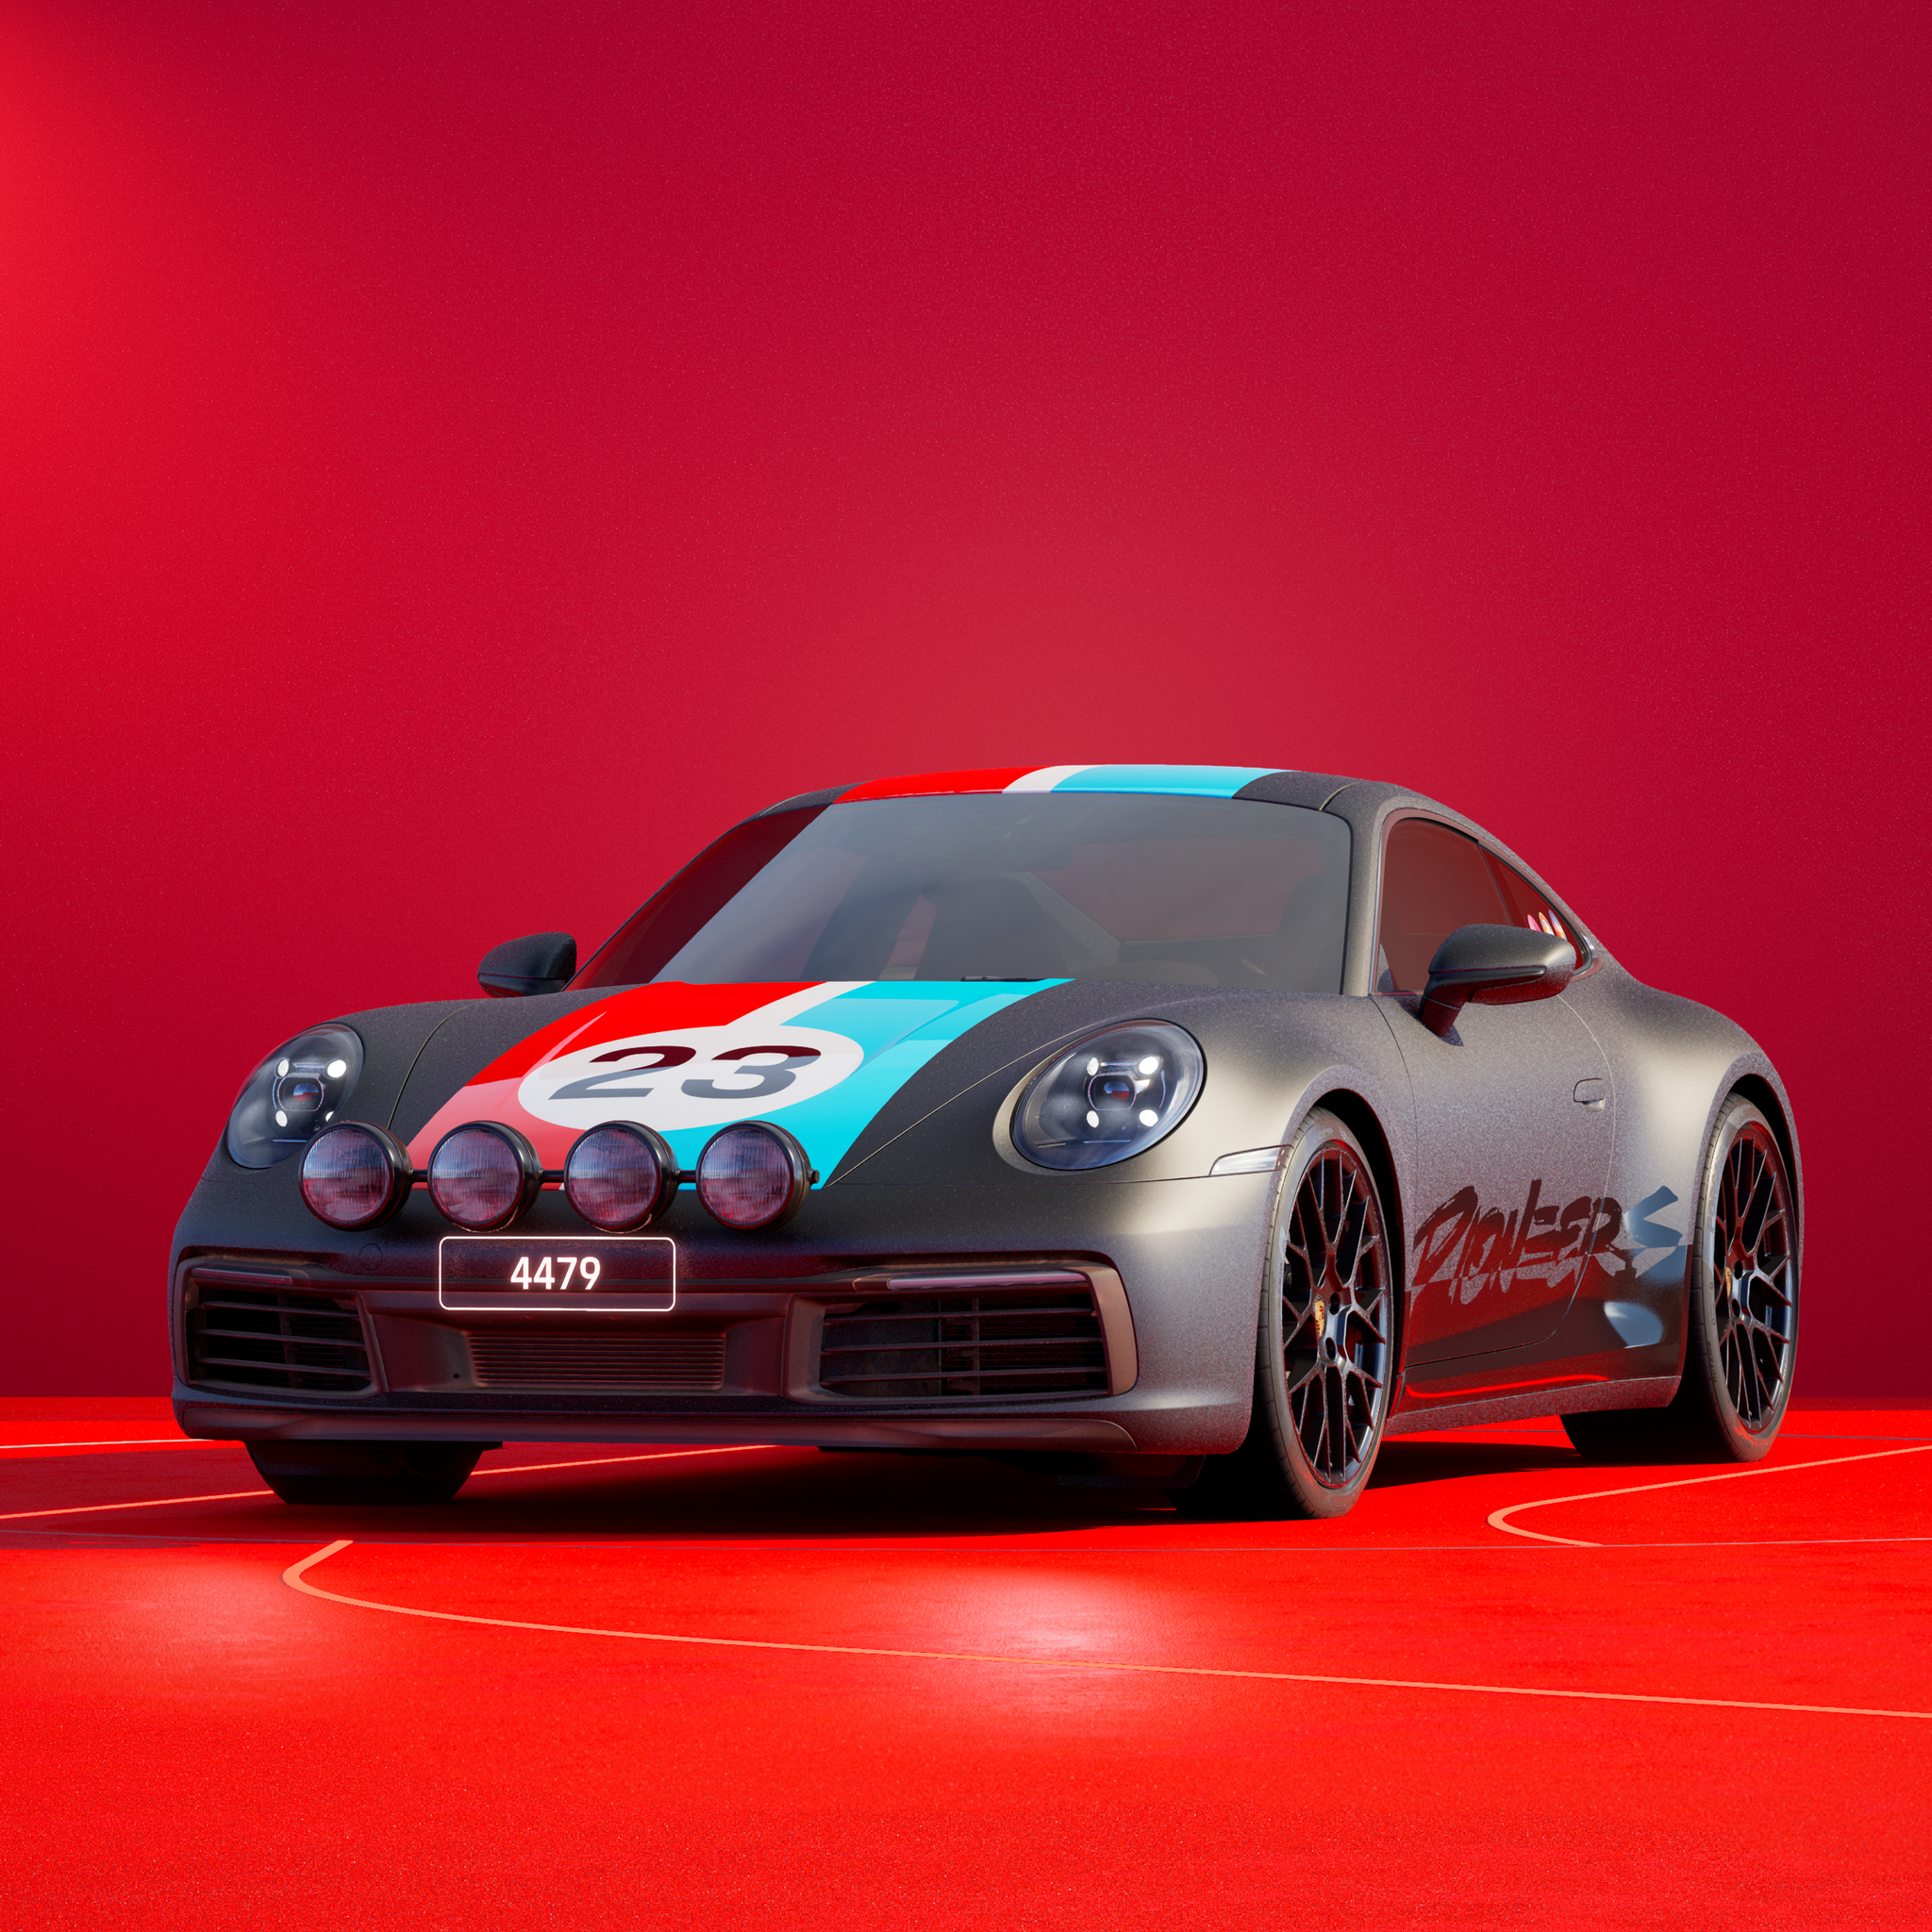 The PORSCHΞ 911 4479 image in phase